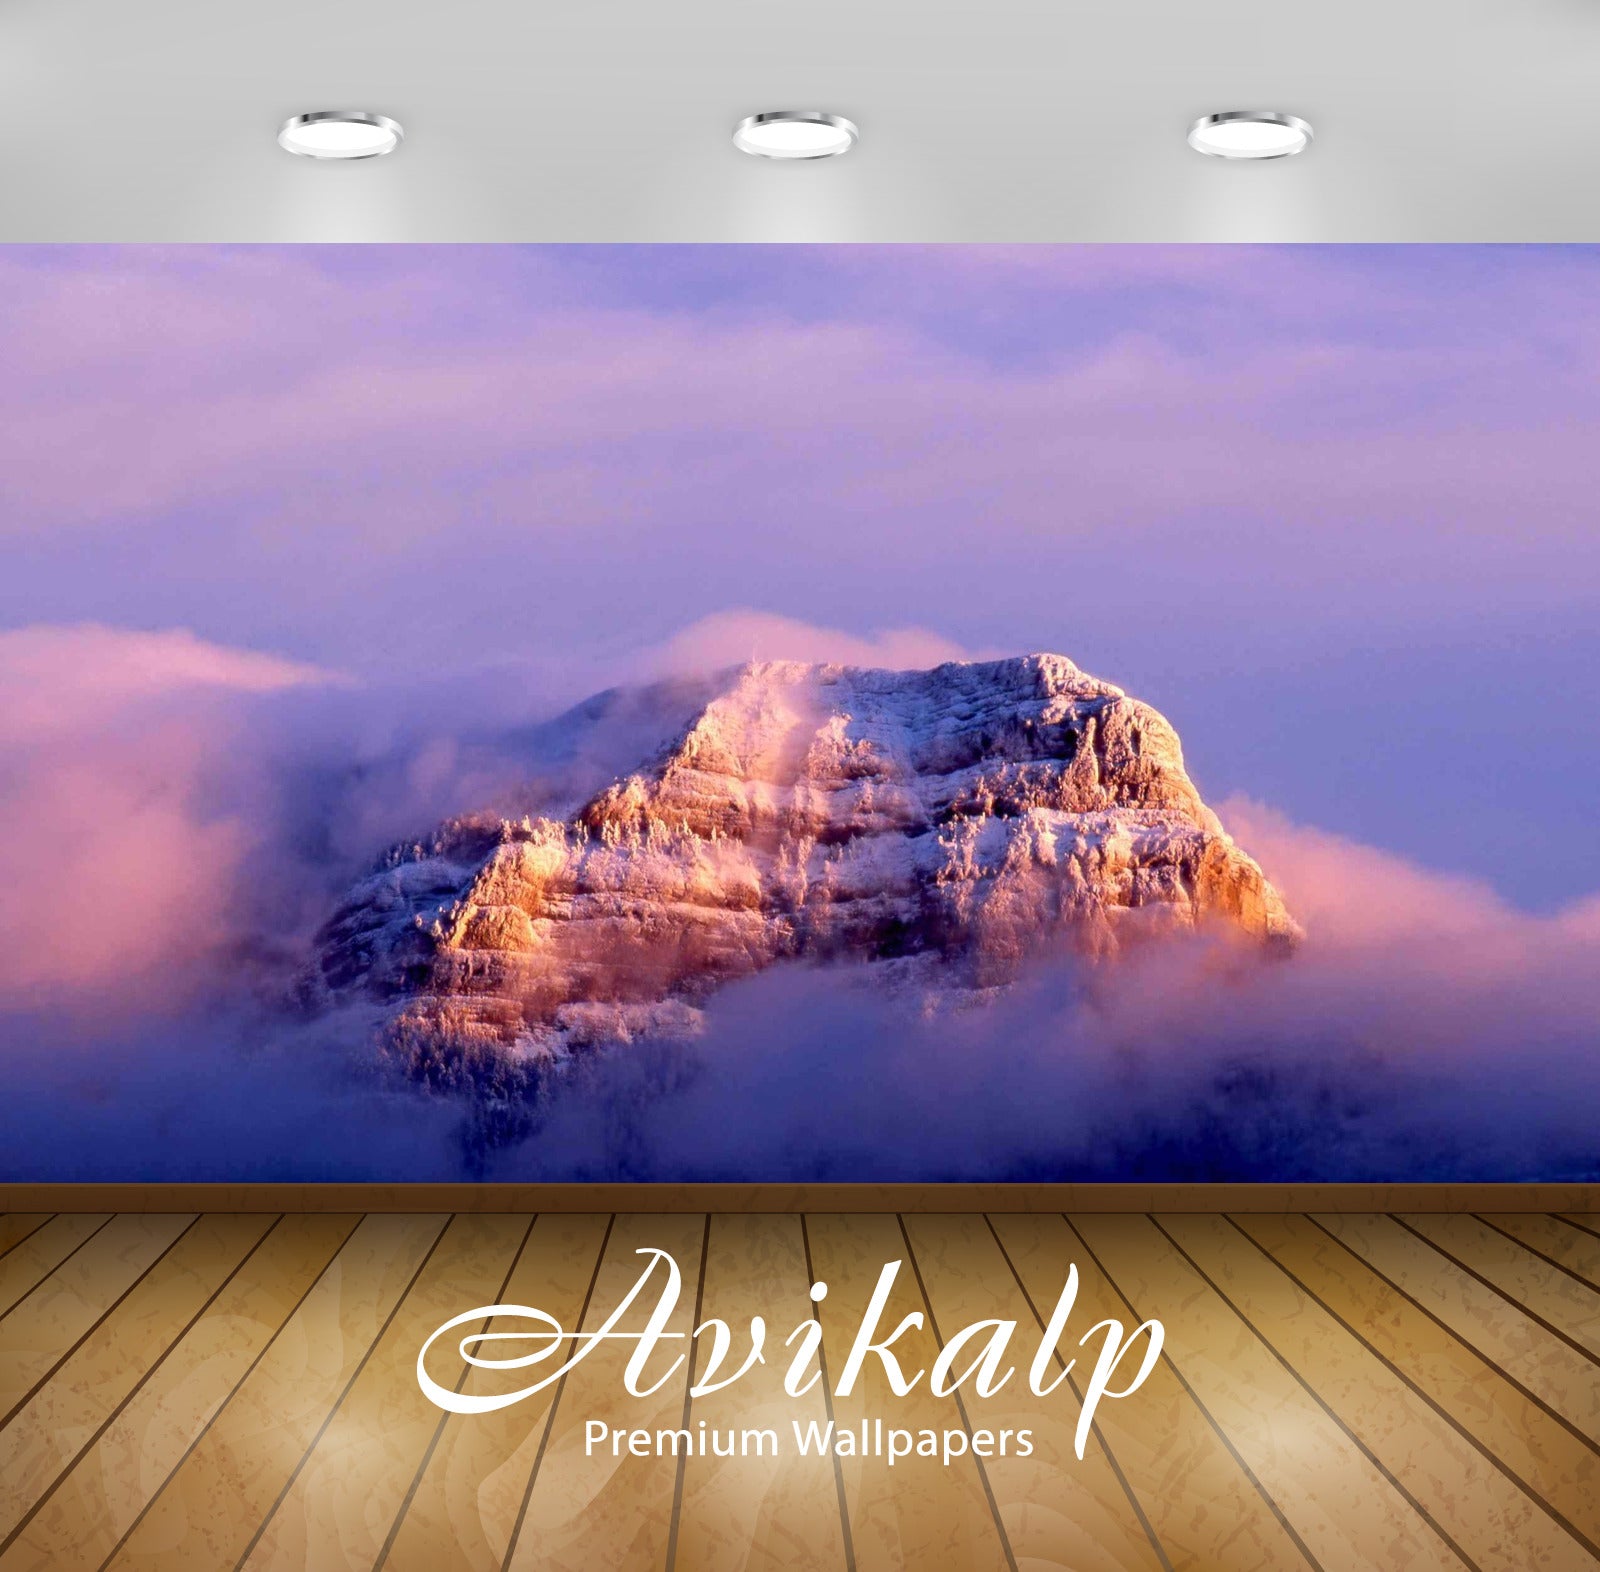 Avikalp Exclusive Awi1264 Cloudy Mountain Full HD Wallpapers for Living room, Hall, Kids Room, Kitch